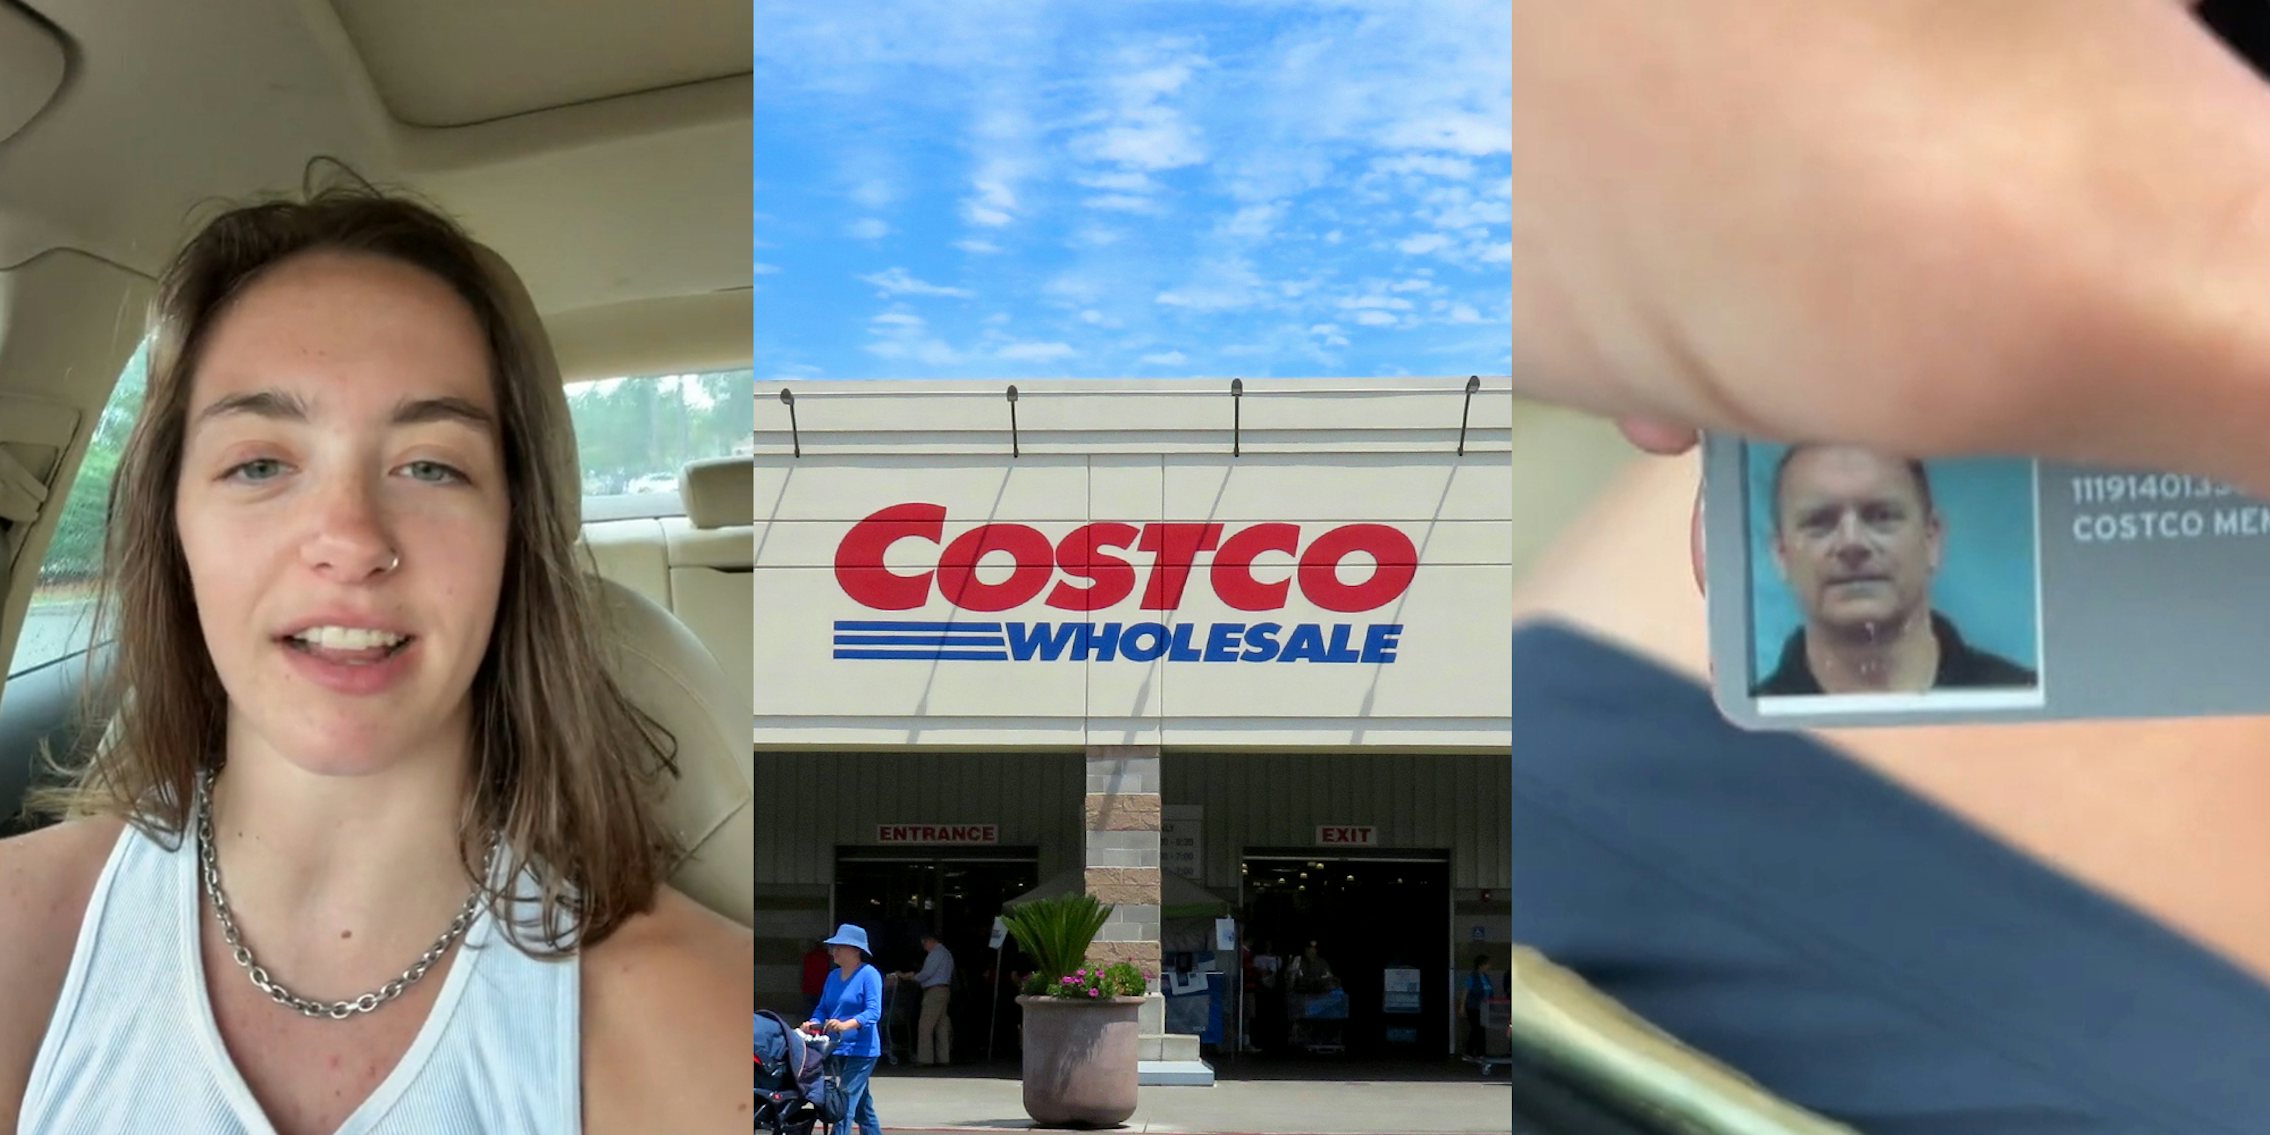 Costco shopper uses dad's card, says worker believed membership photo was her with short hair